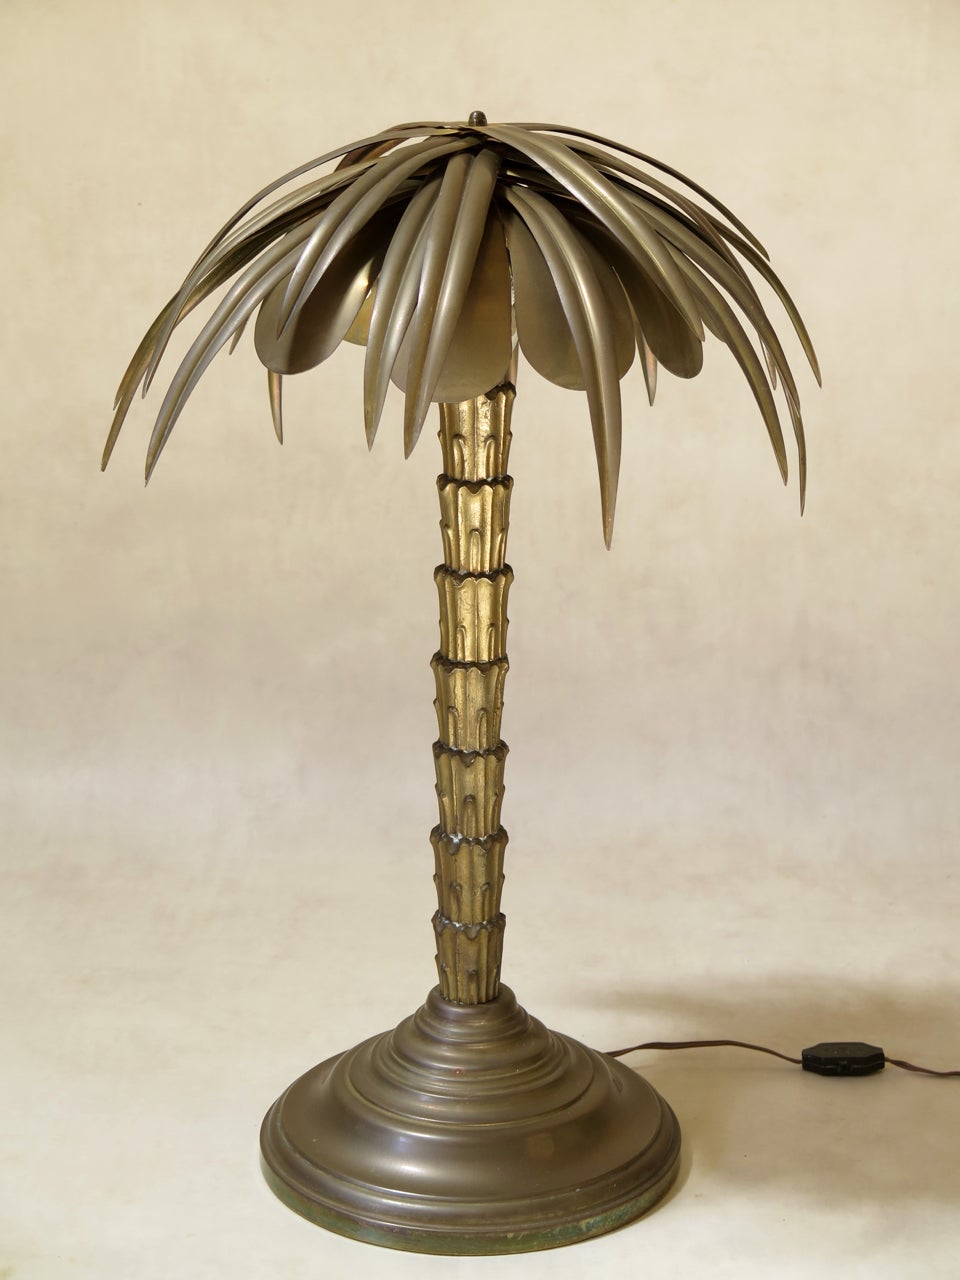 Handsome and well-made brass palm tree lamp. Each frond is an individual piece, and they are all fixed in place by a screw at the apex. The trunk is of solid cast brass, and is in two parts (top and bottom). Heavy round stepped base. Four original